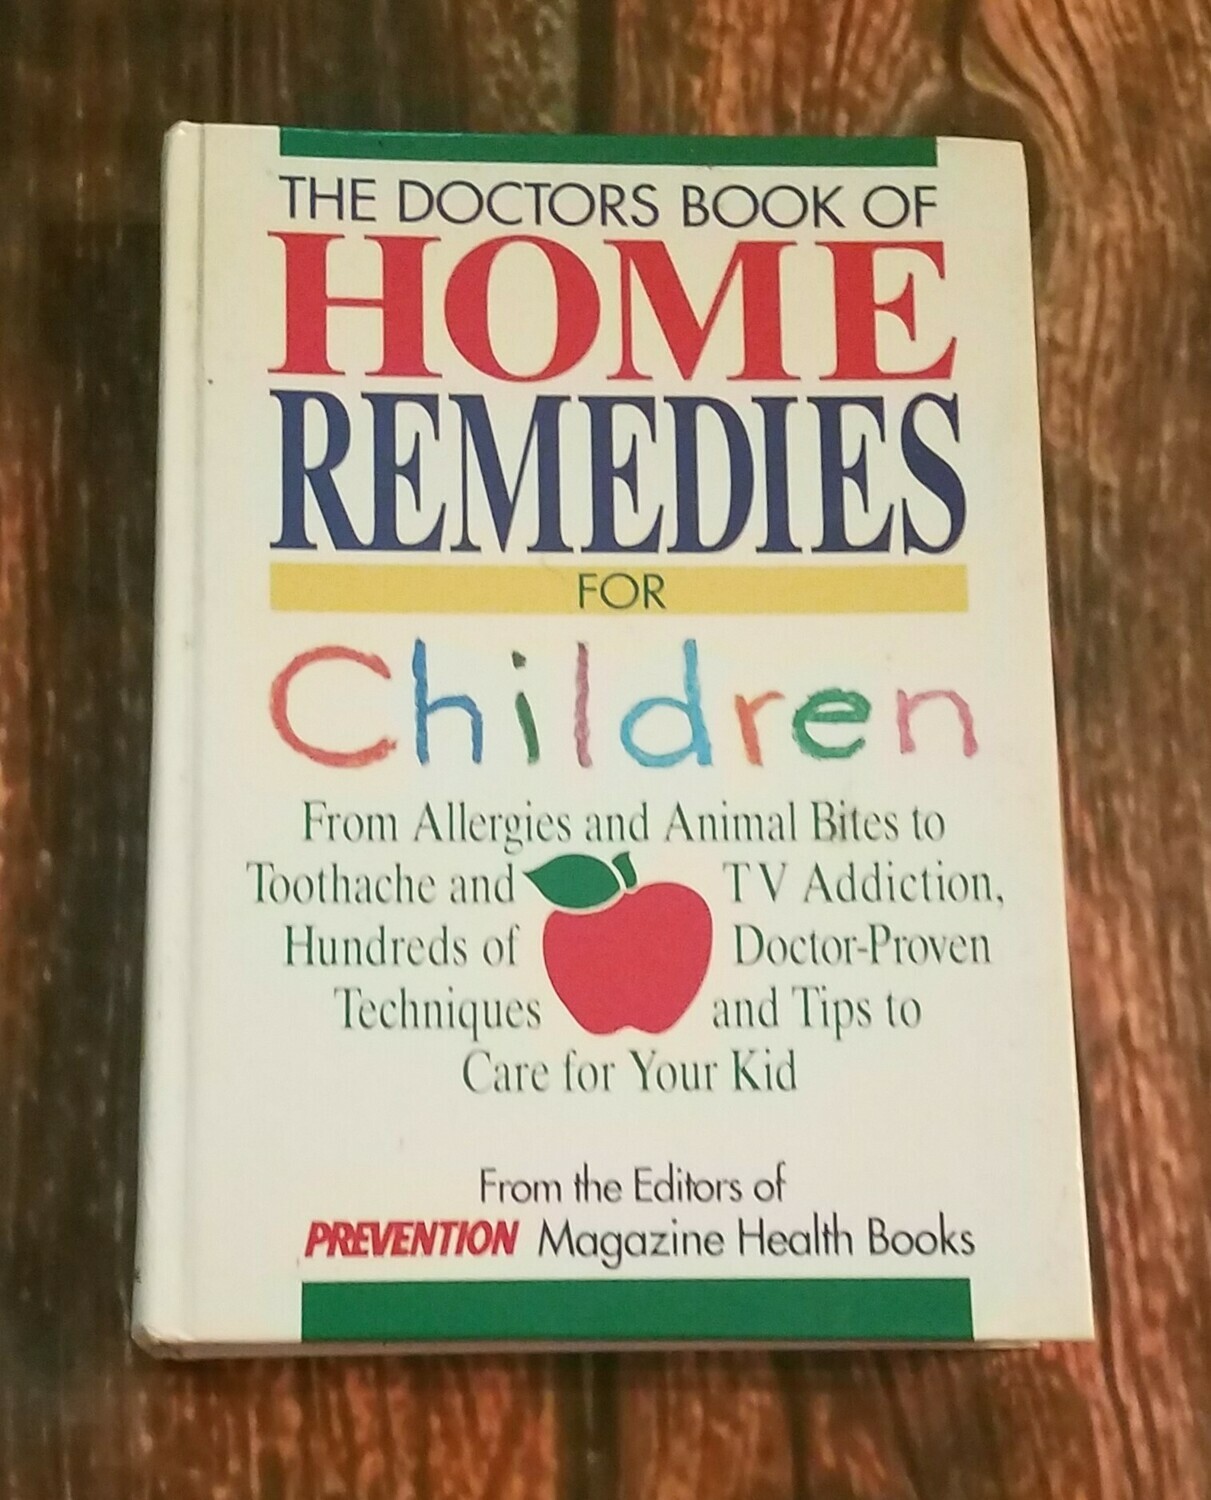 Home Remedies for Children by Denise Foley, Eileen Nechas, Susan Perry, and Dena K. Salmon